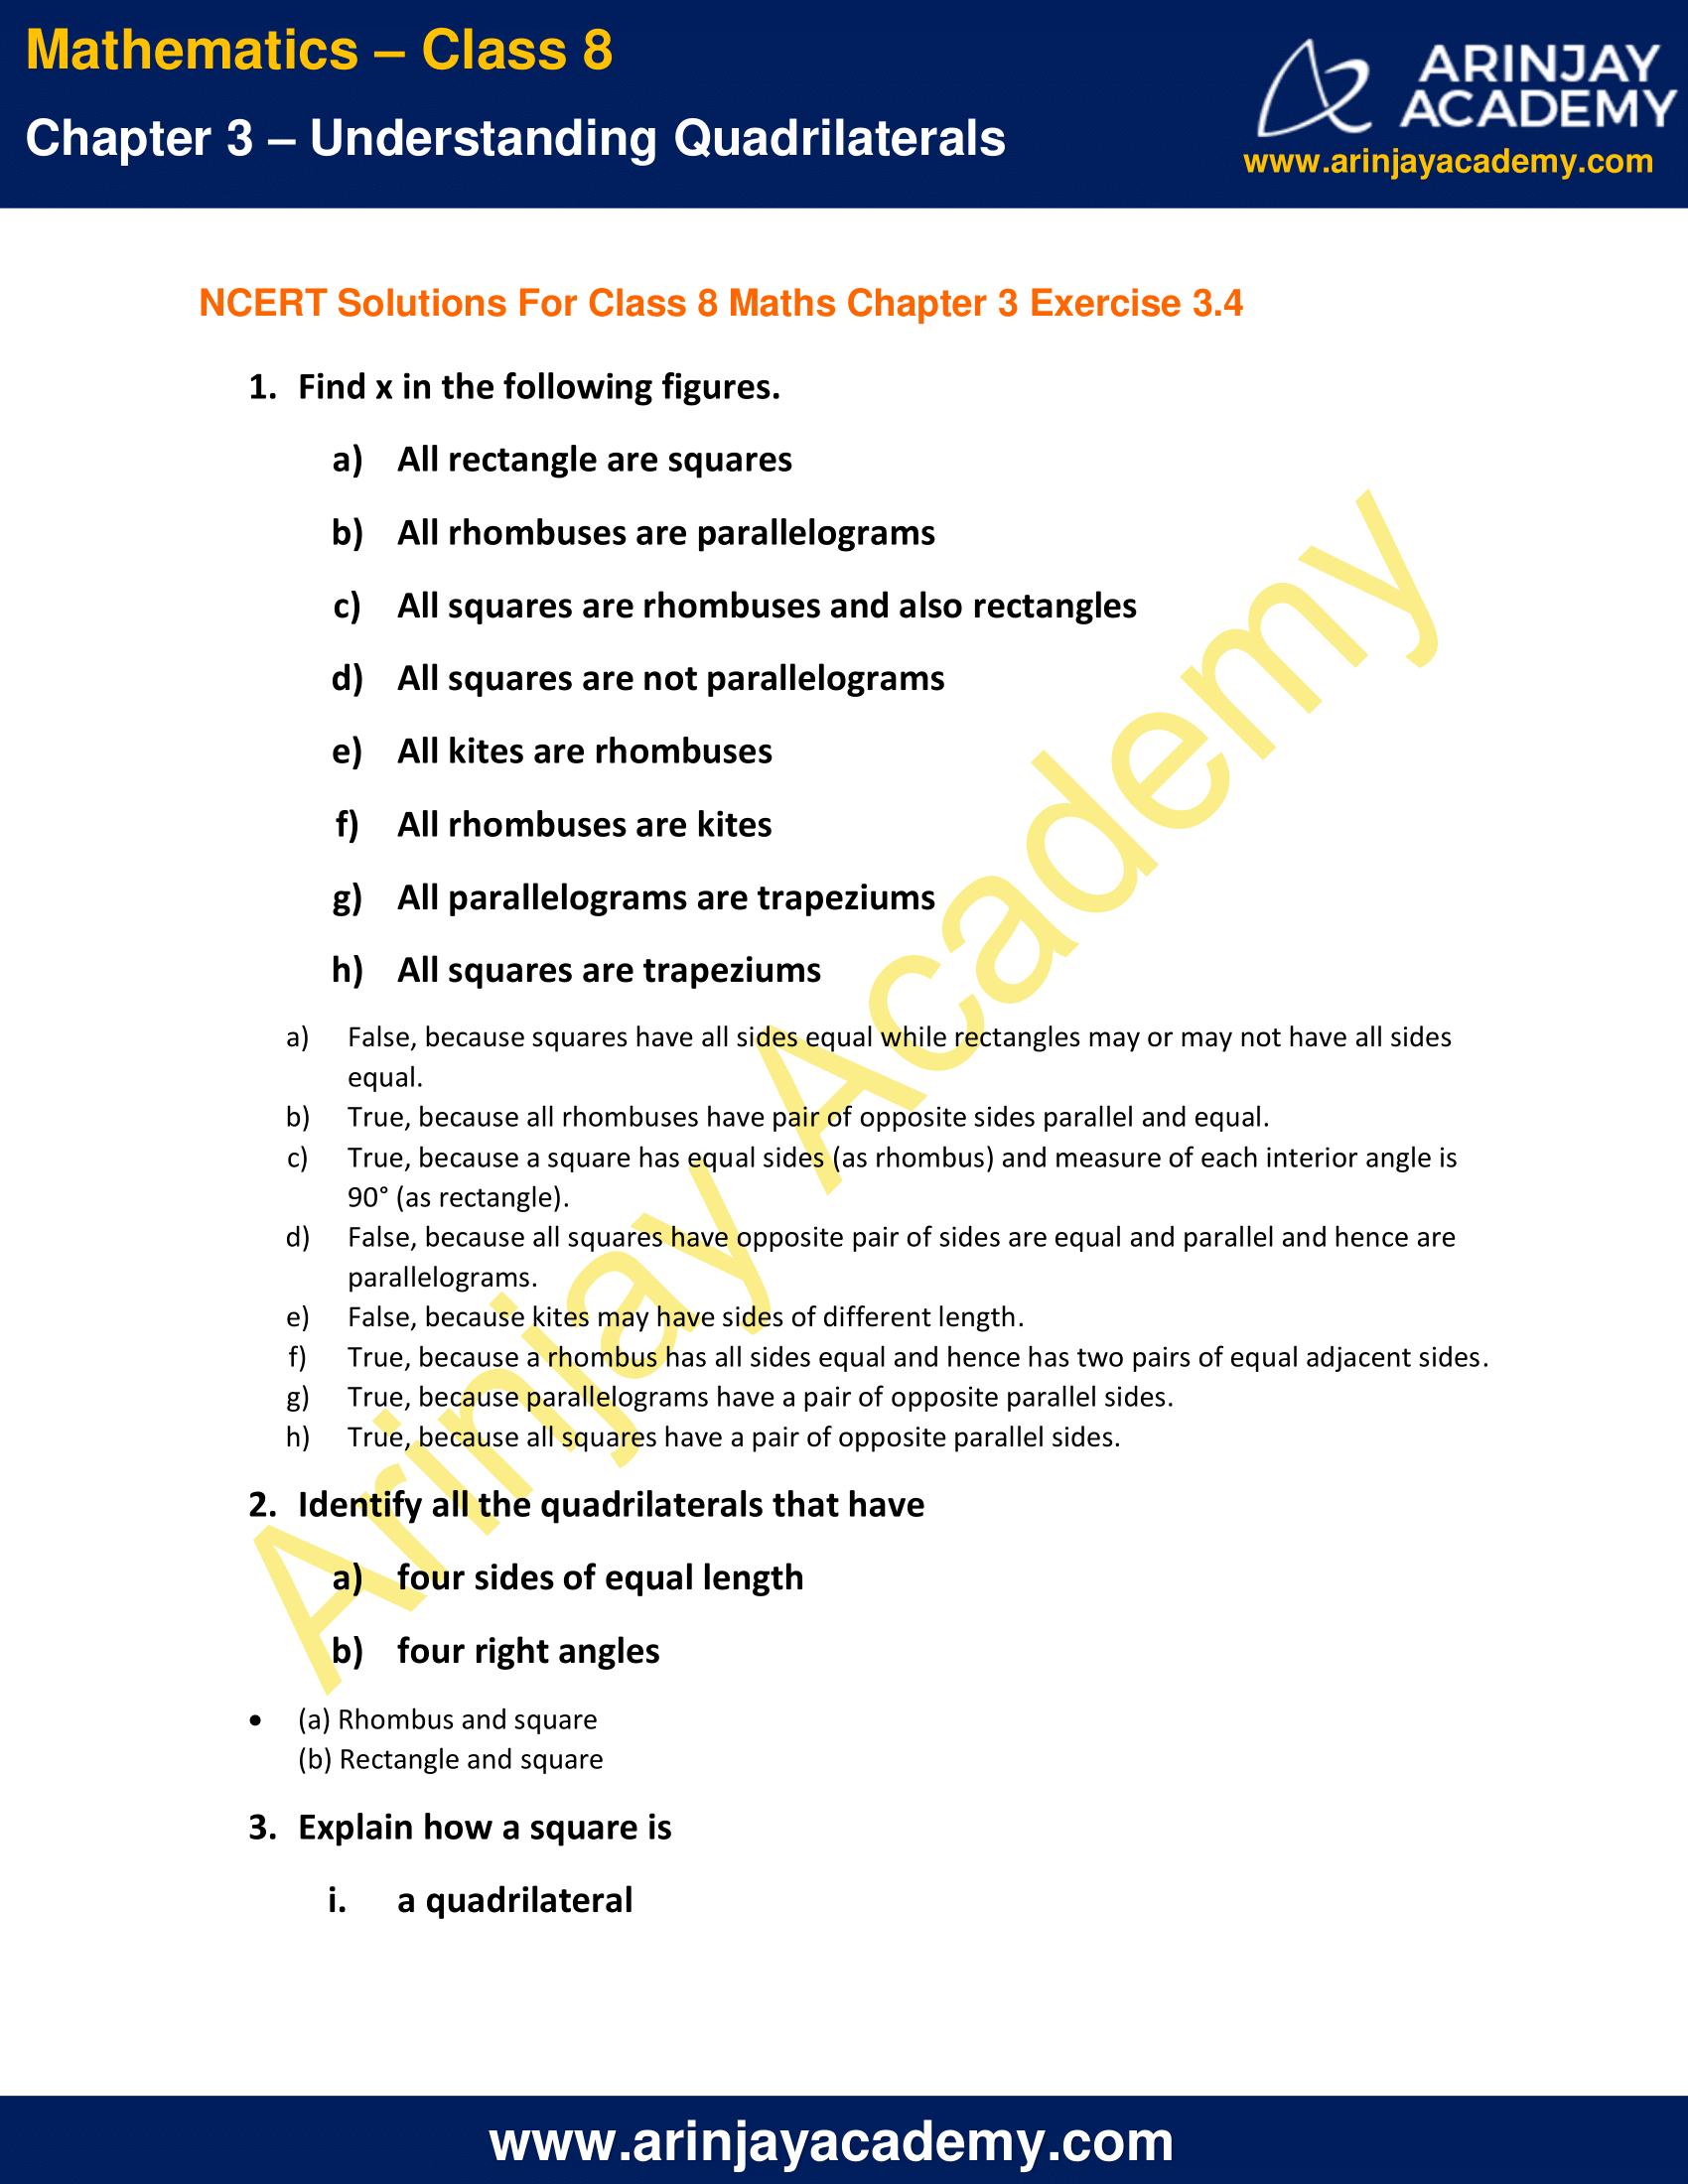 NCERT Solutions for Class 8 Maths Chapter 3 Exercise 3.4 image 1